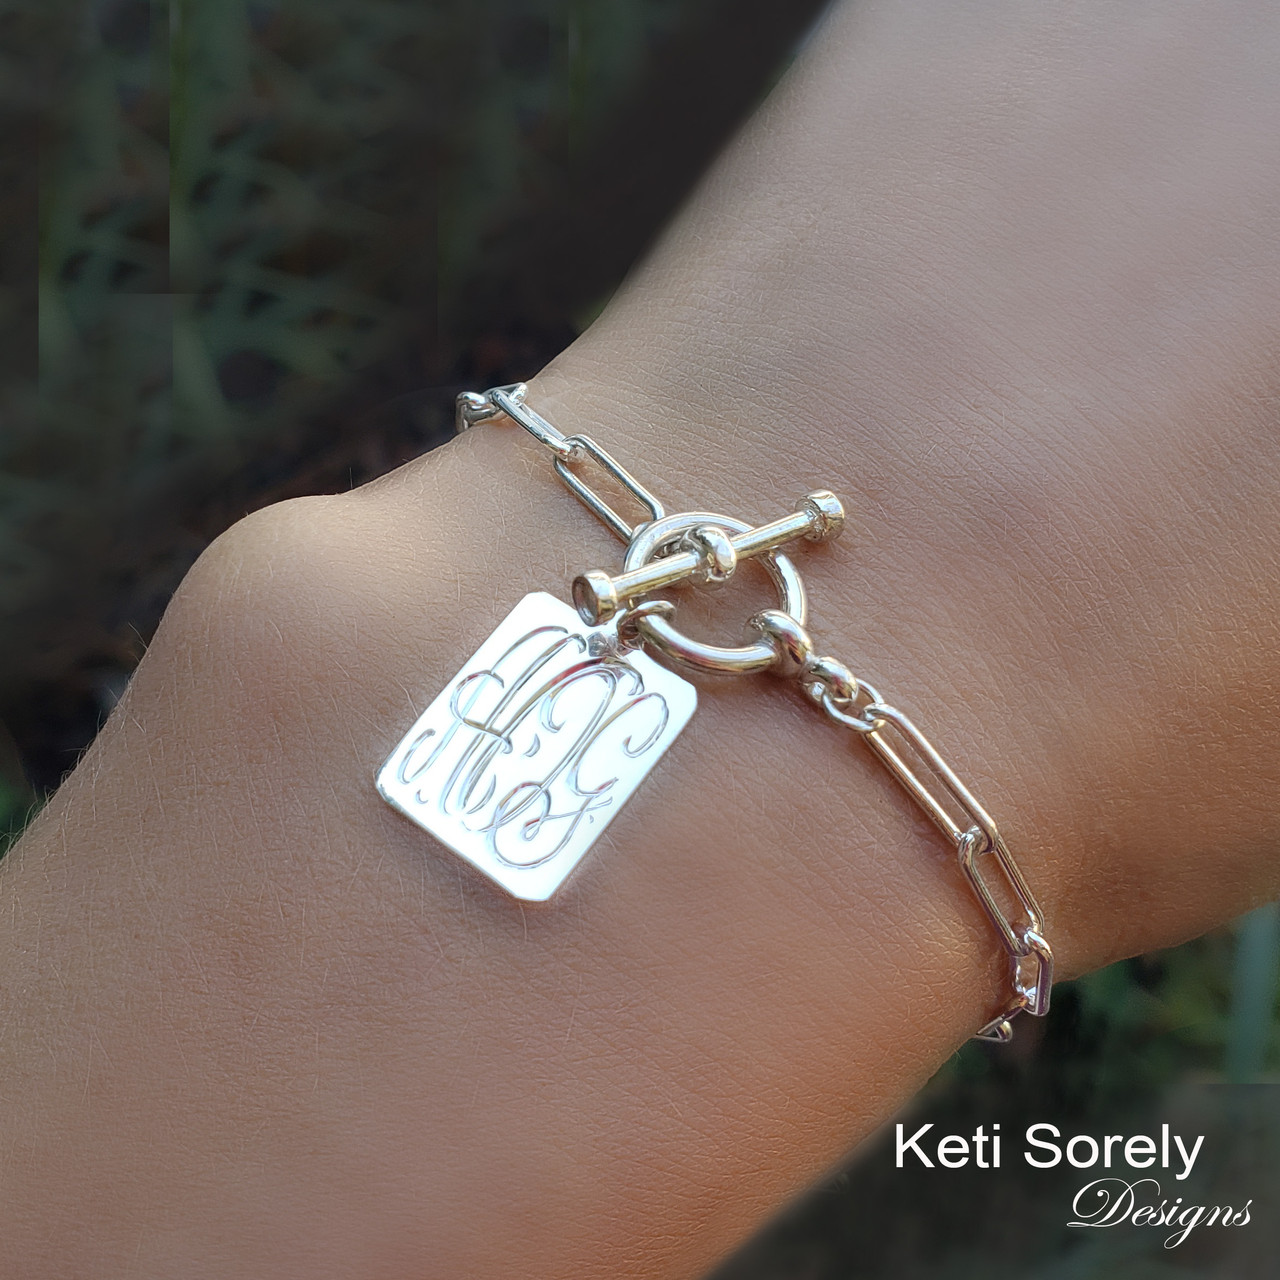 Custom Engraved bracelet with rectangle monogram charm, toggle clasp and  Paperclip chain in Sterling Silver, Yellow Gold or Rose Gold.